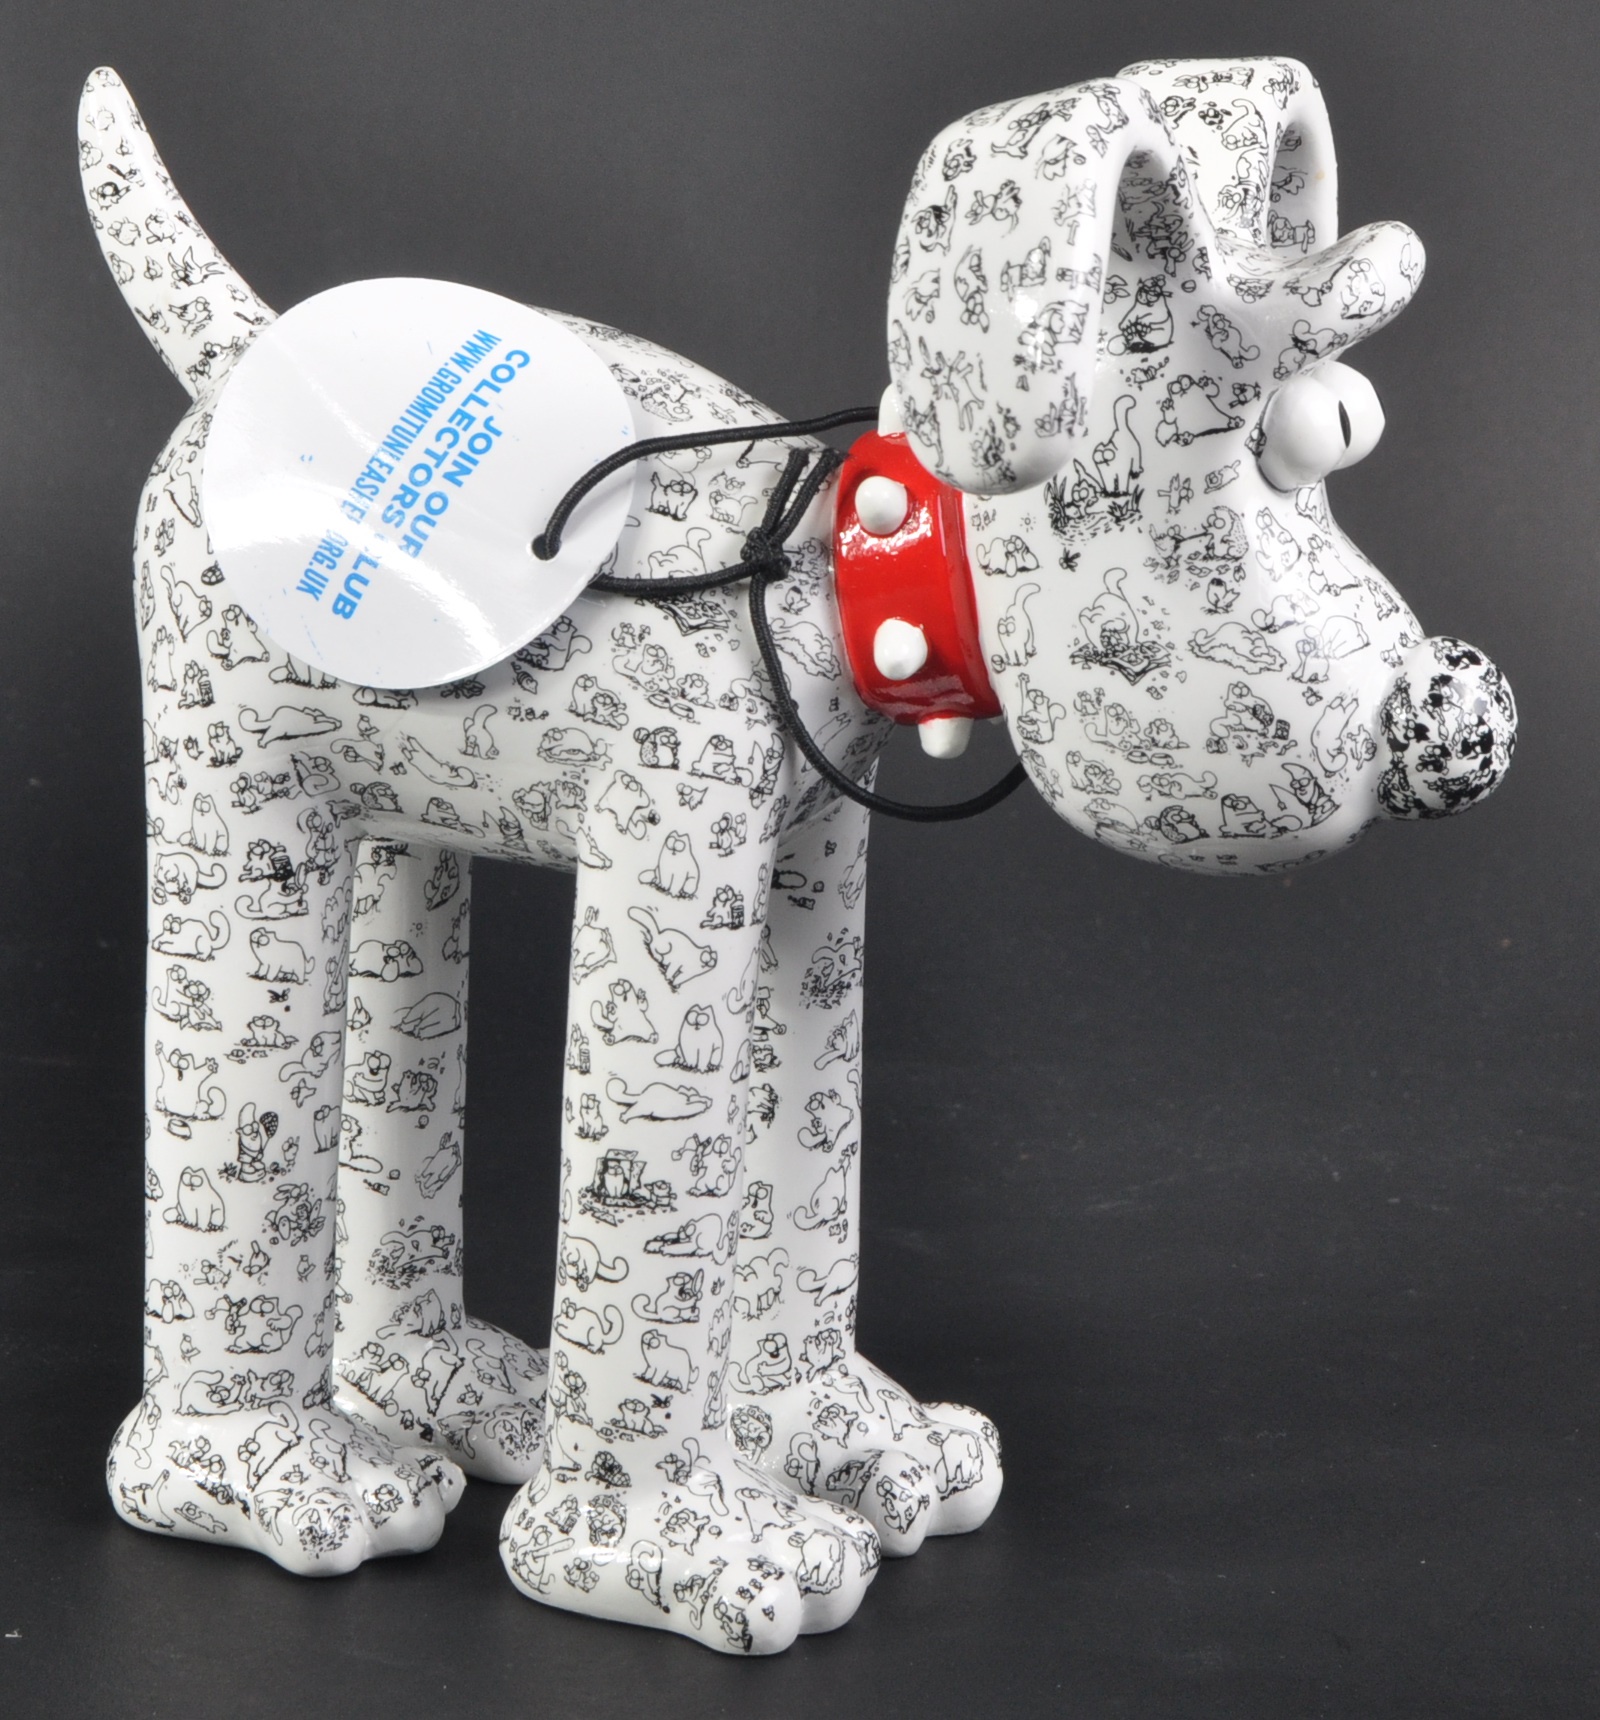 WALLACE & GROMIT - GROMIT UNLEASHED COLLECTABLE FIGURINE - Image 4 of 7